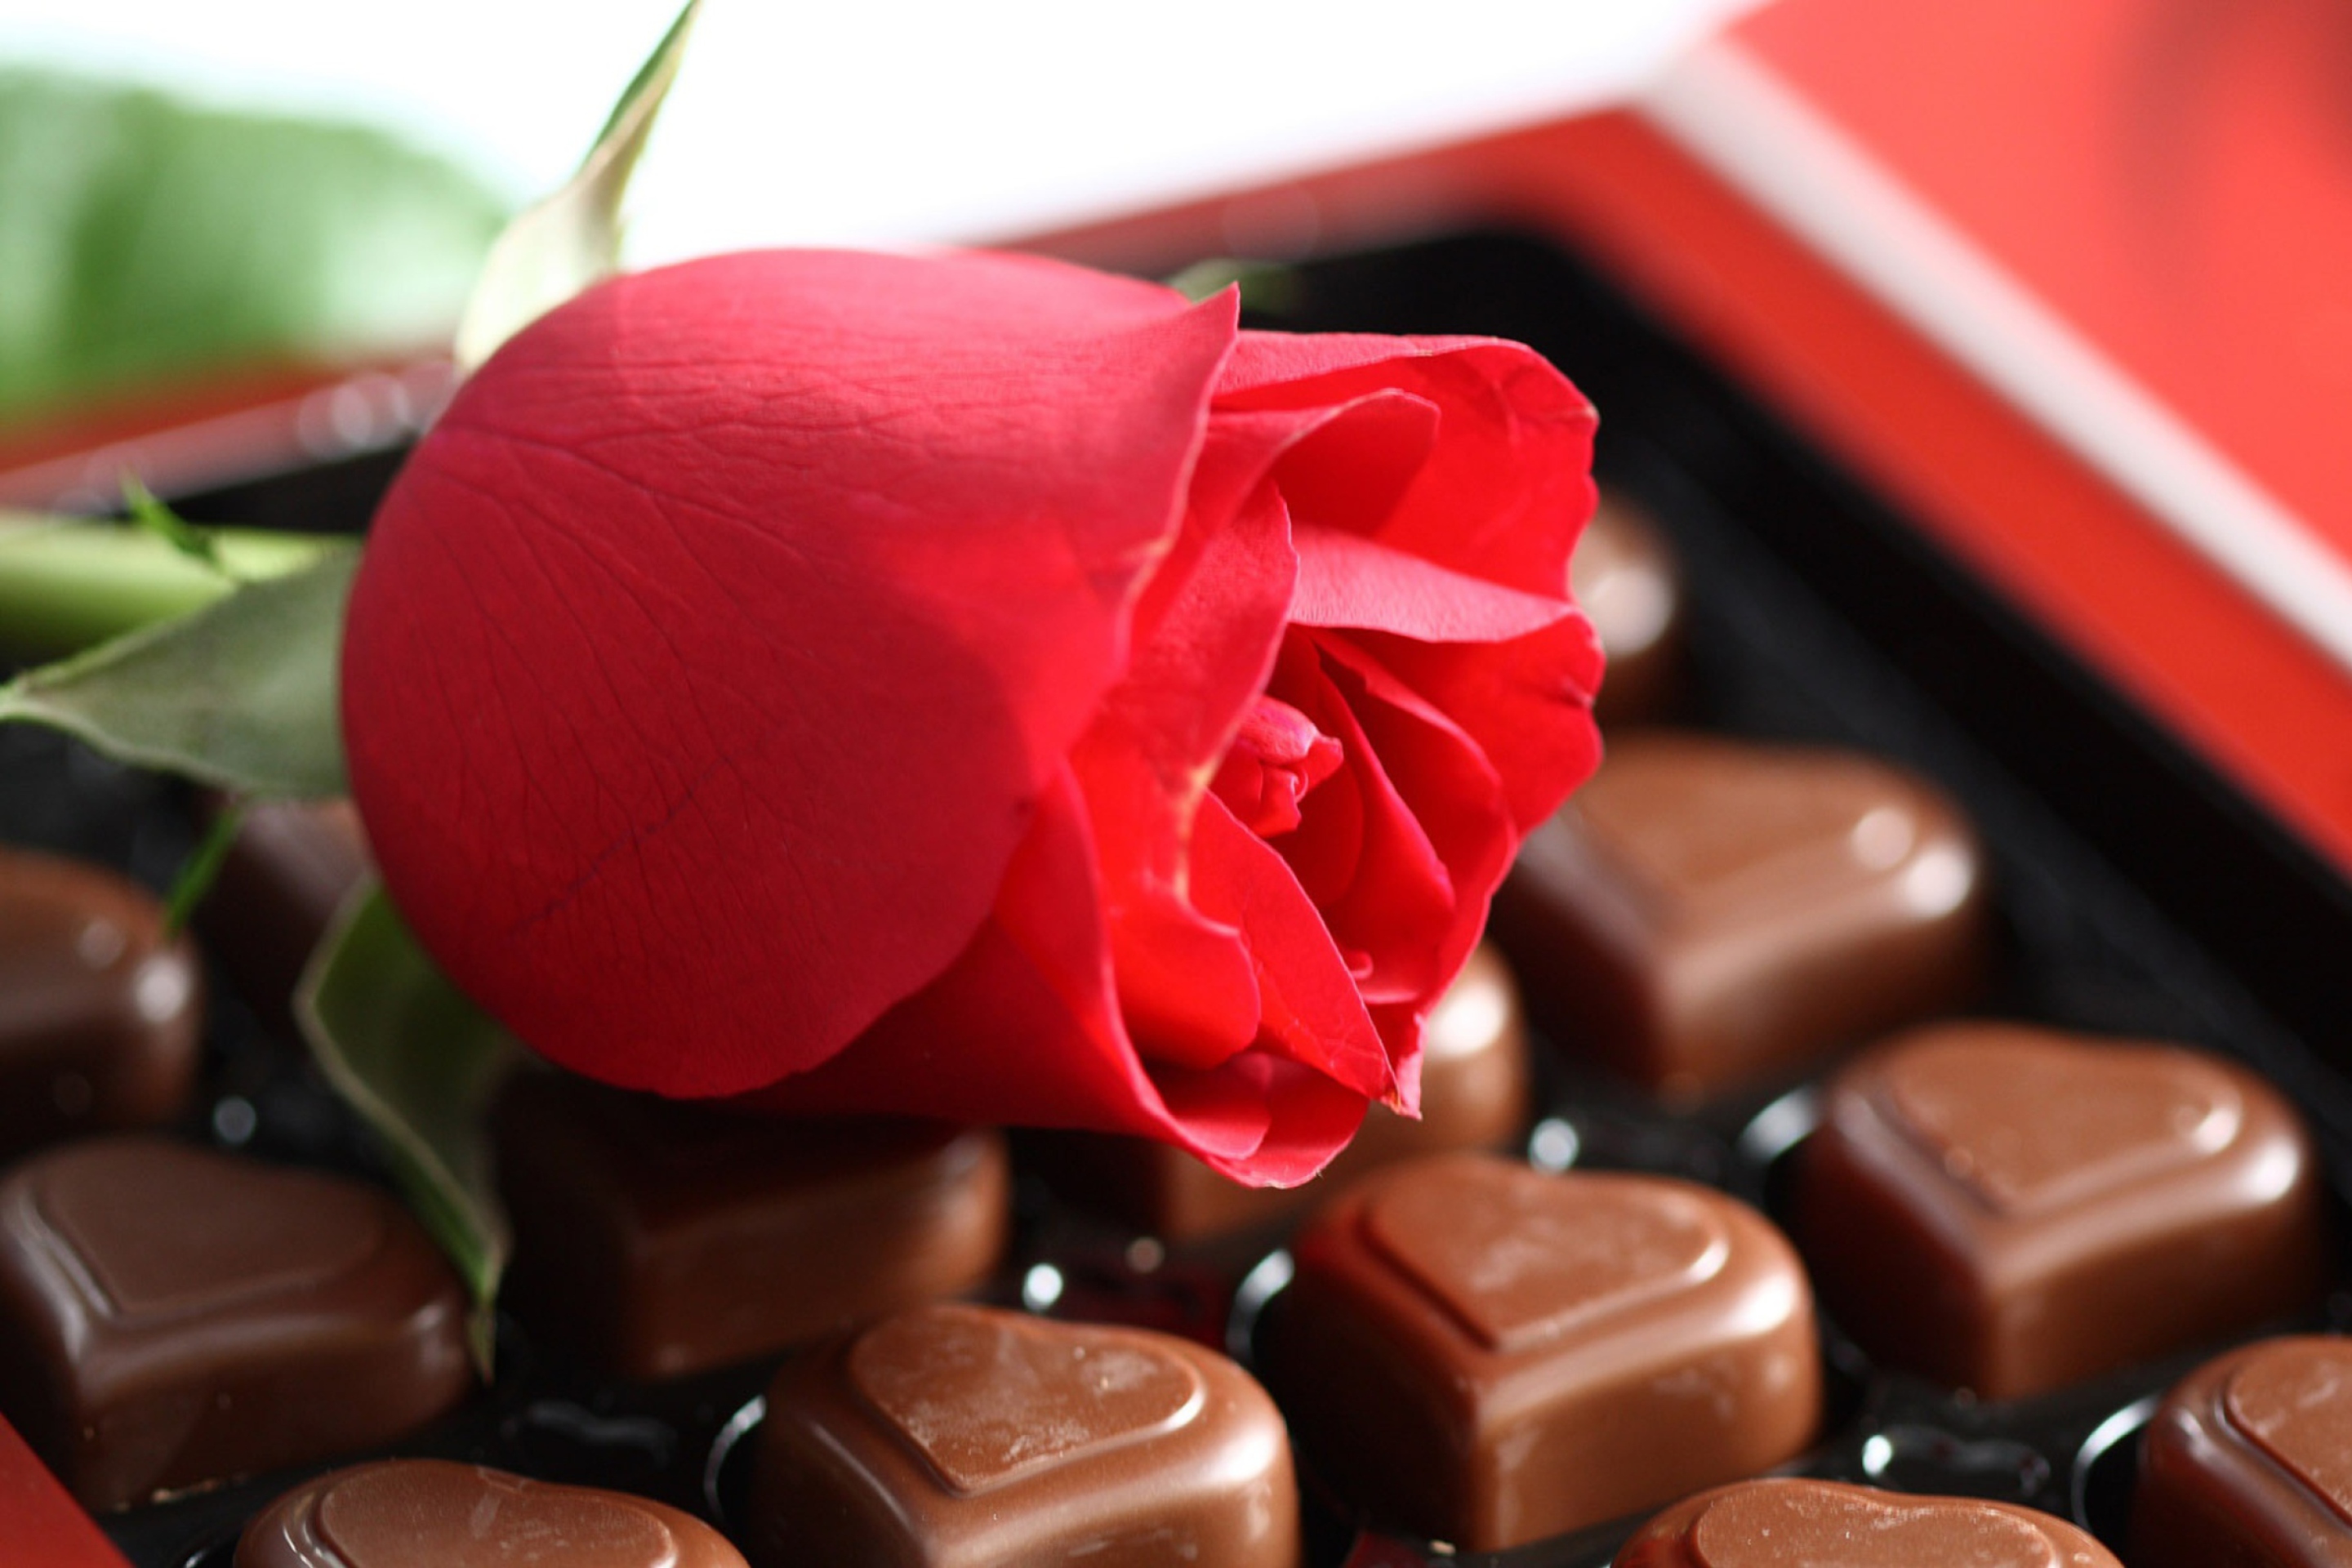 Chocolate And Rose wallpaper 2880x1920